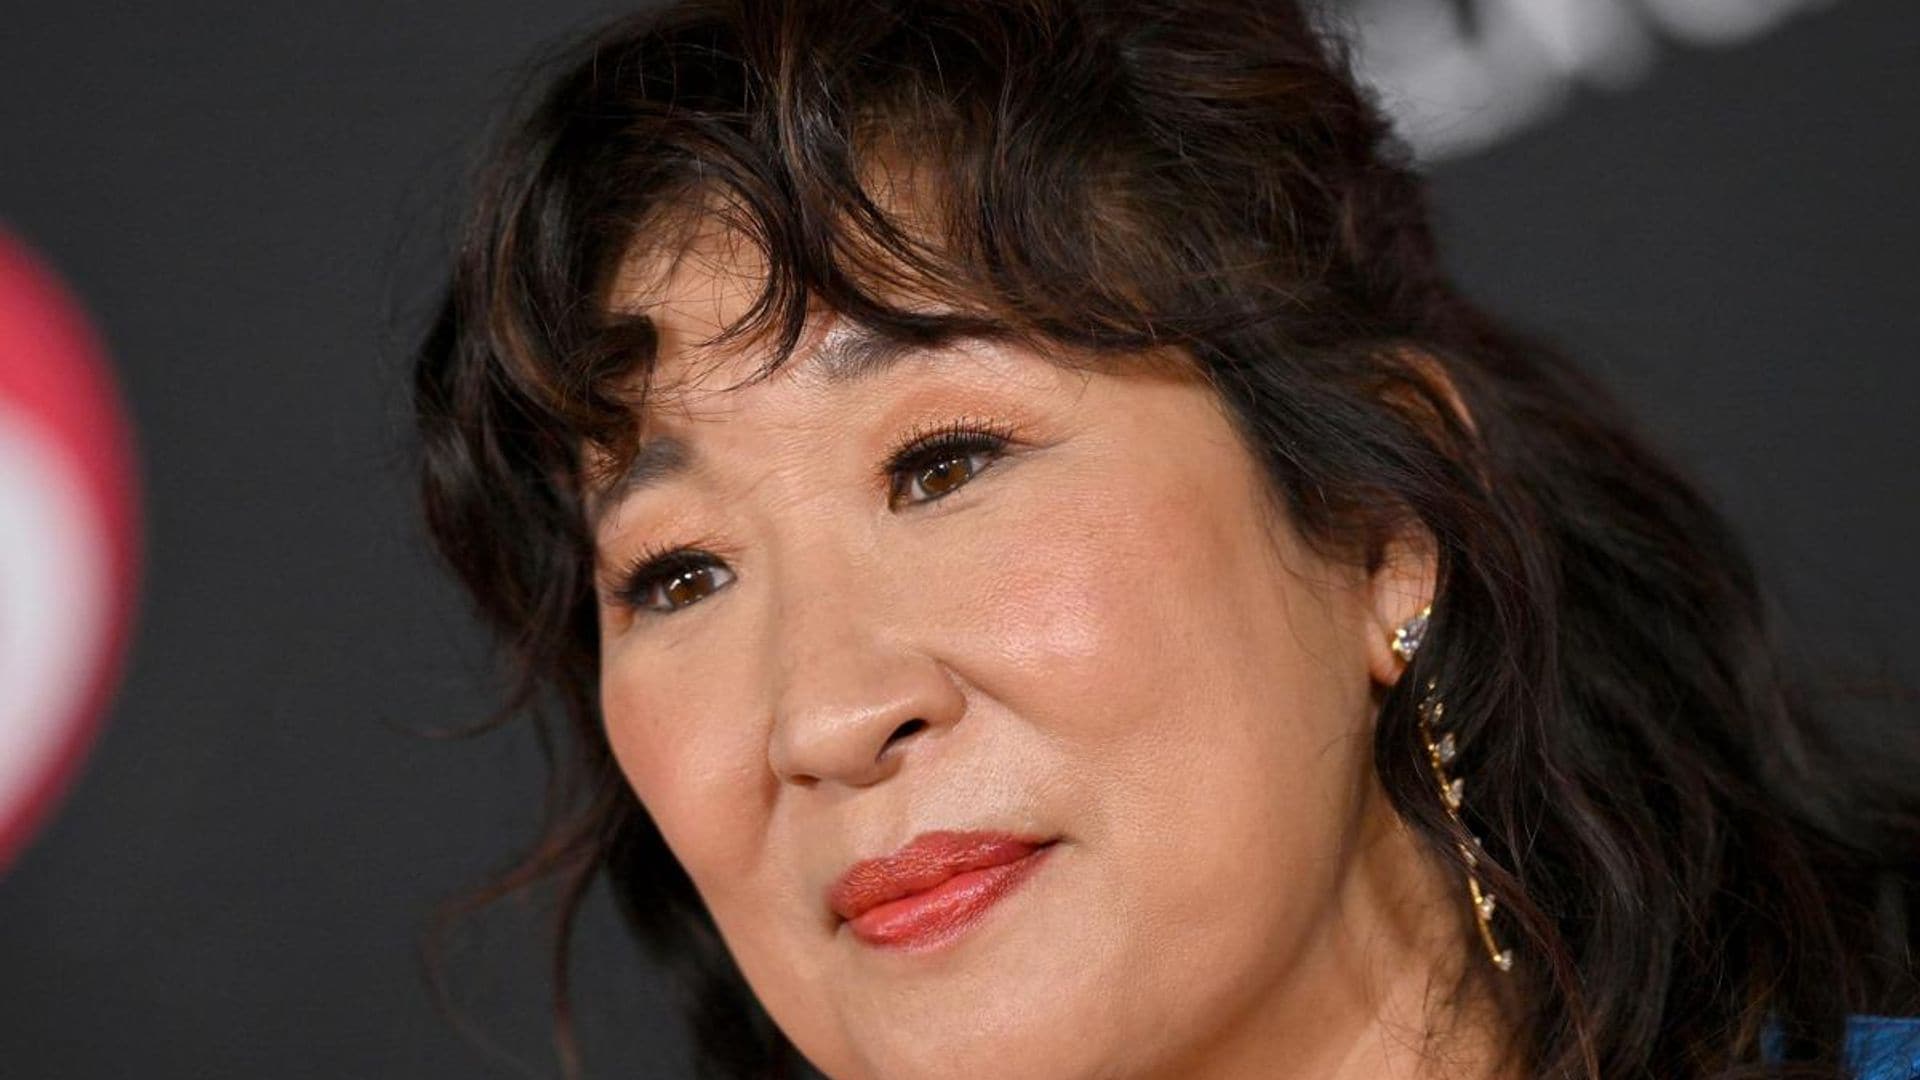 The reason why actress Sandra Oh was invited to Queen Elizabeth II’s state funeral